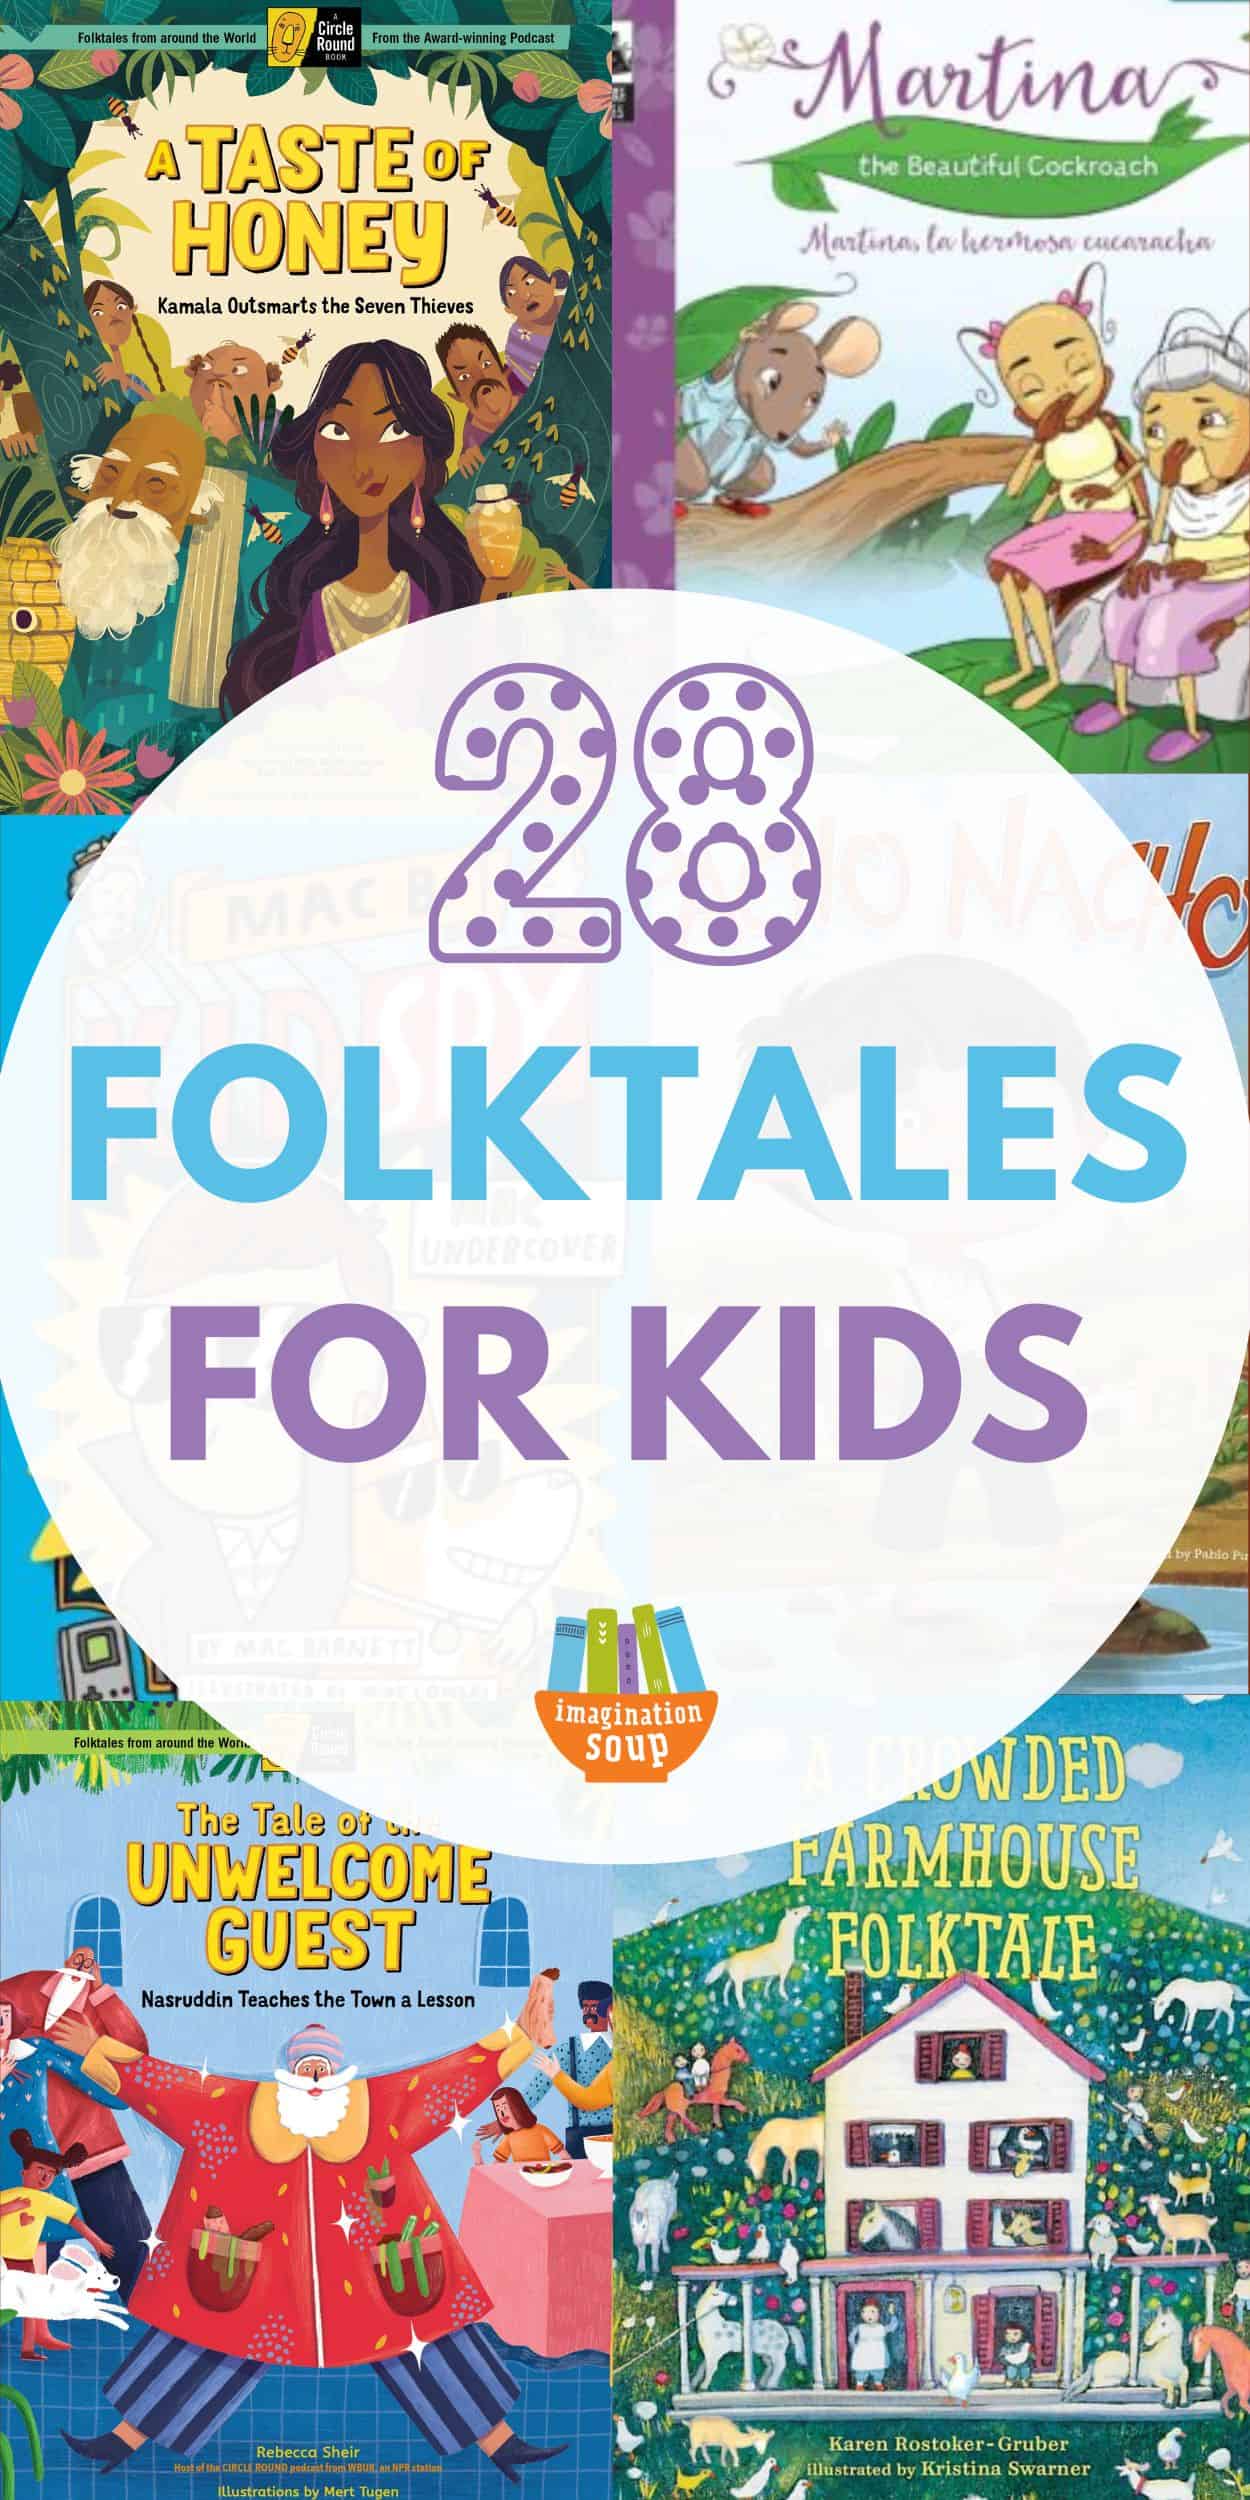 Do your kids know about folktales? These are traditional narrative stories from a culture's oral traditions meant to share values and/or explain something in the natural world or about human nature, often about ordinary people, and can include talking animals like fables. Sometimes folktales contain a wise life lesson at the end, just like a fable does.